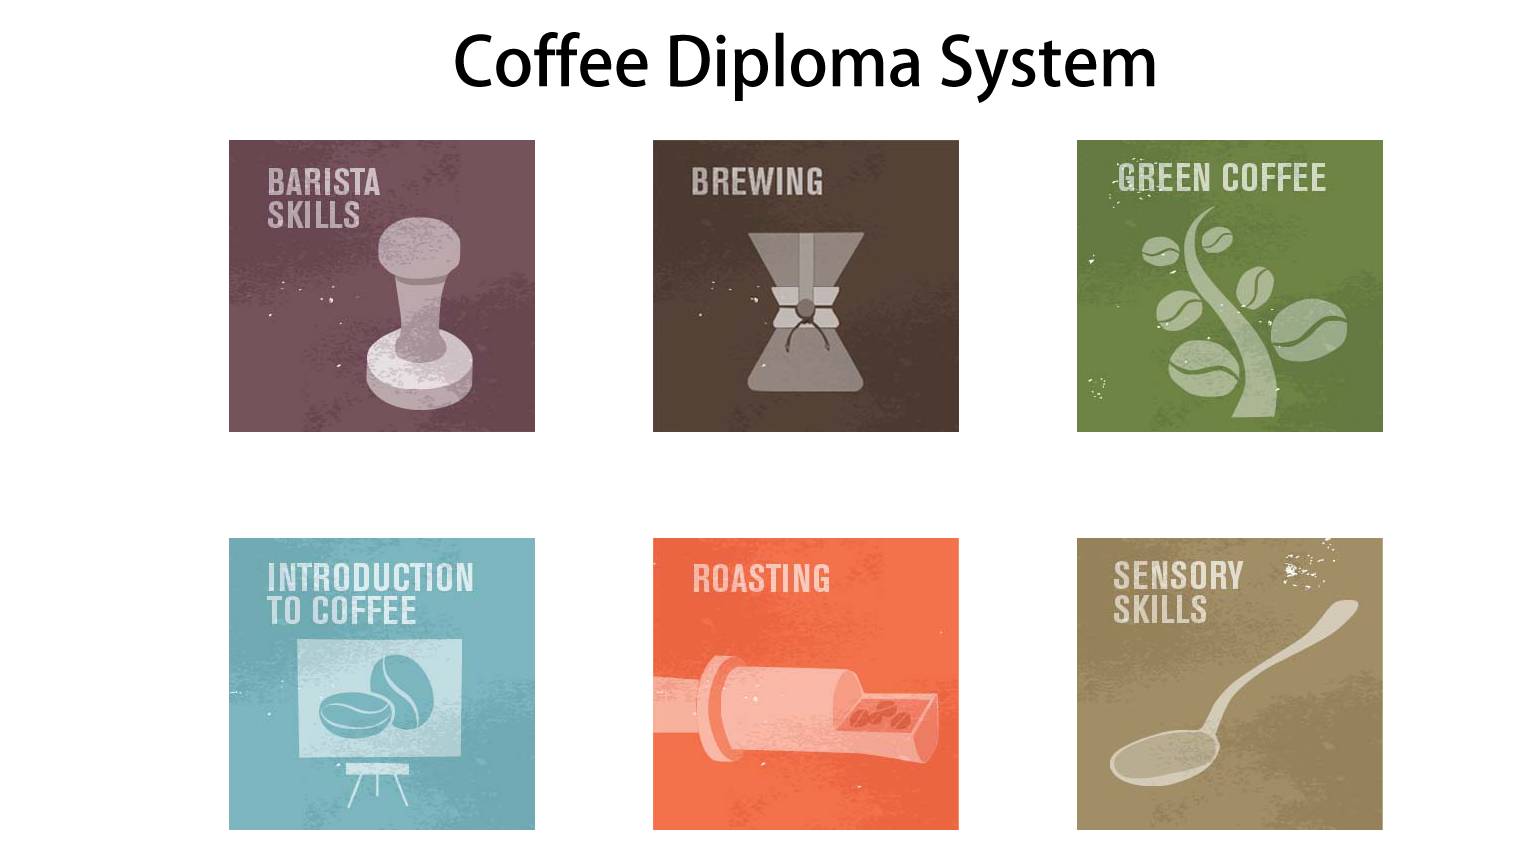 How to get the SCA Coffee Diploma? Which of the six certificates of SCA has high gold content?